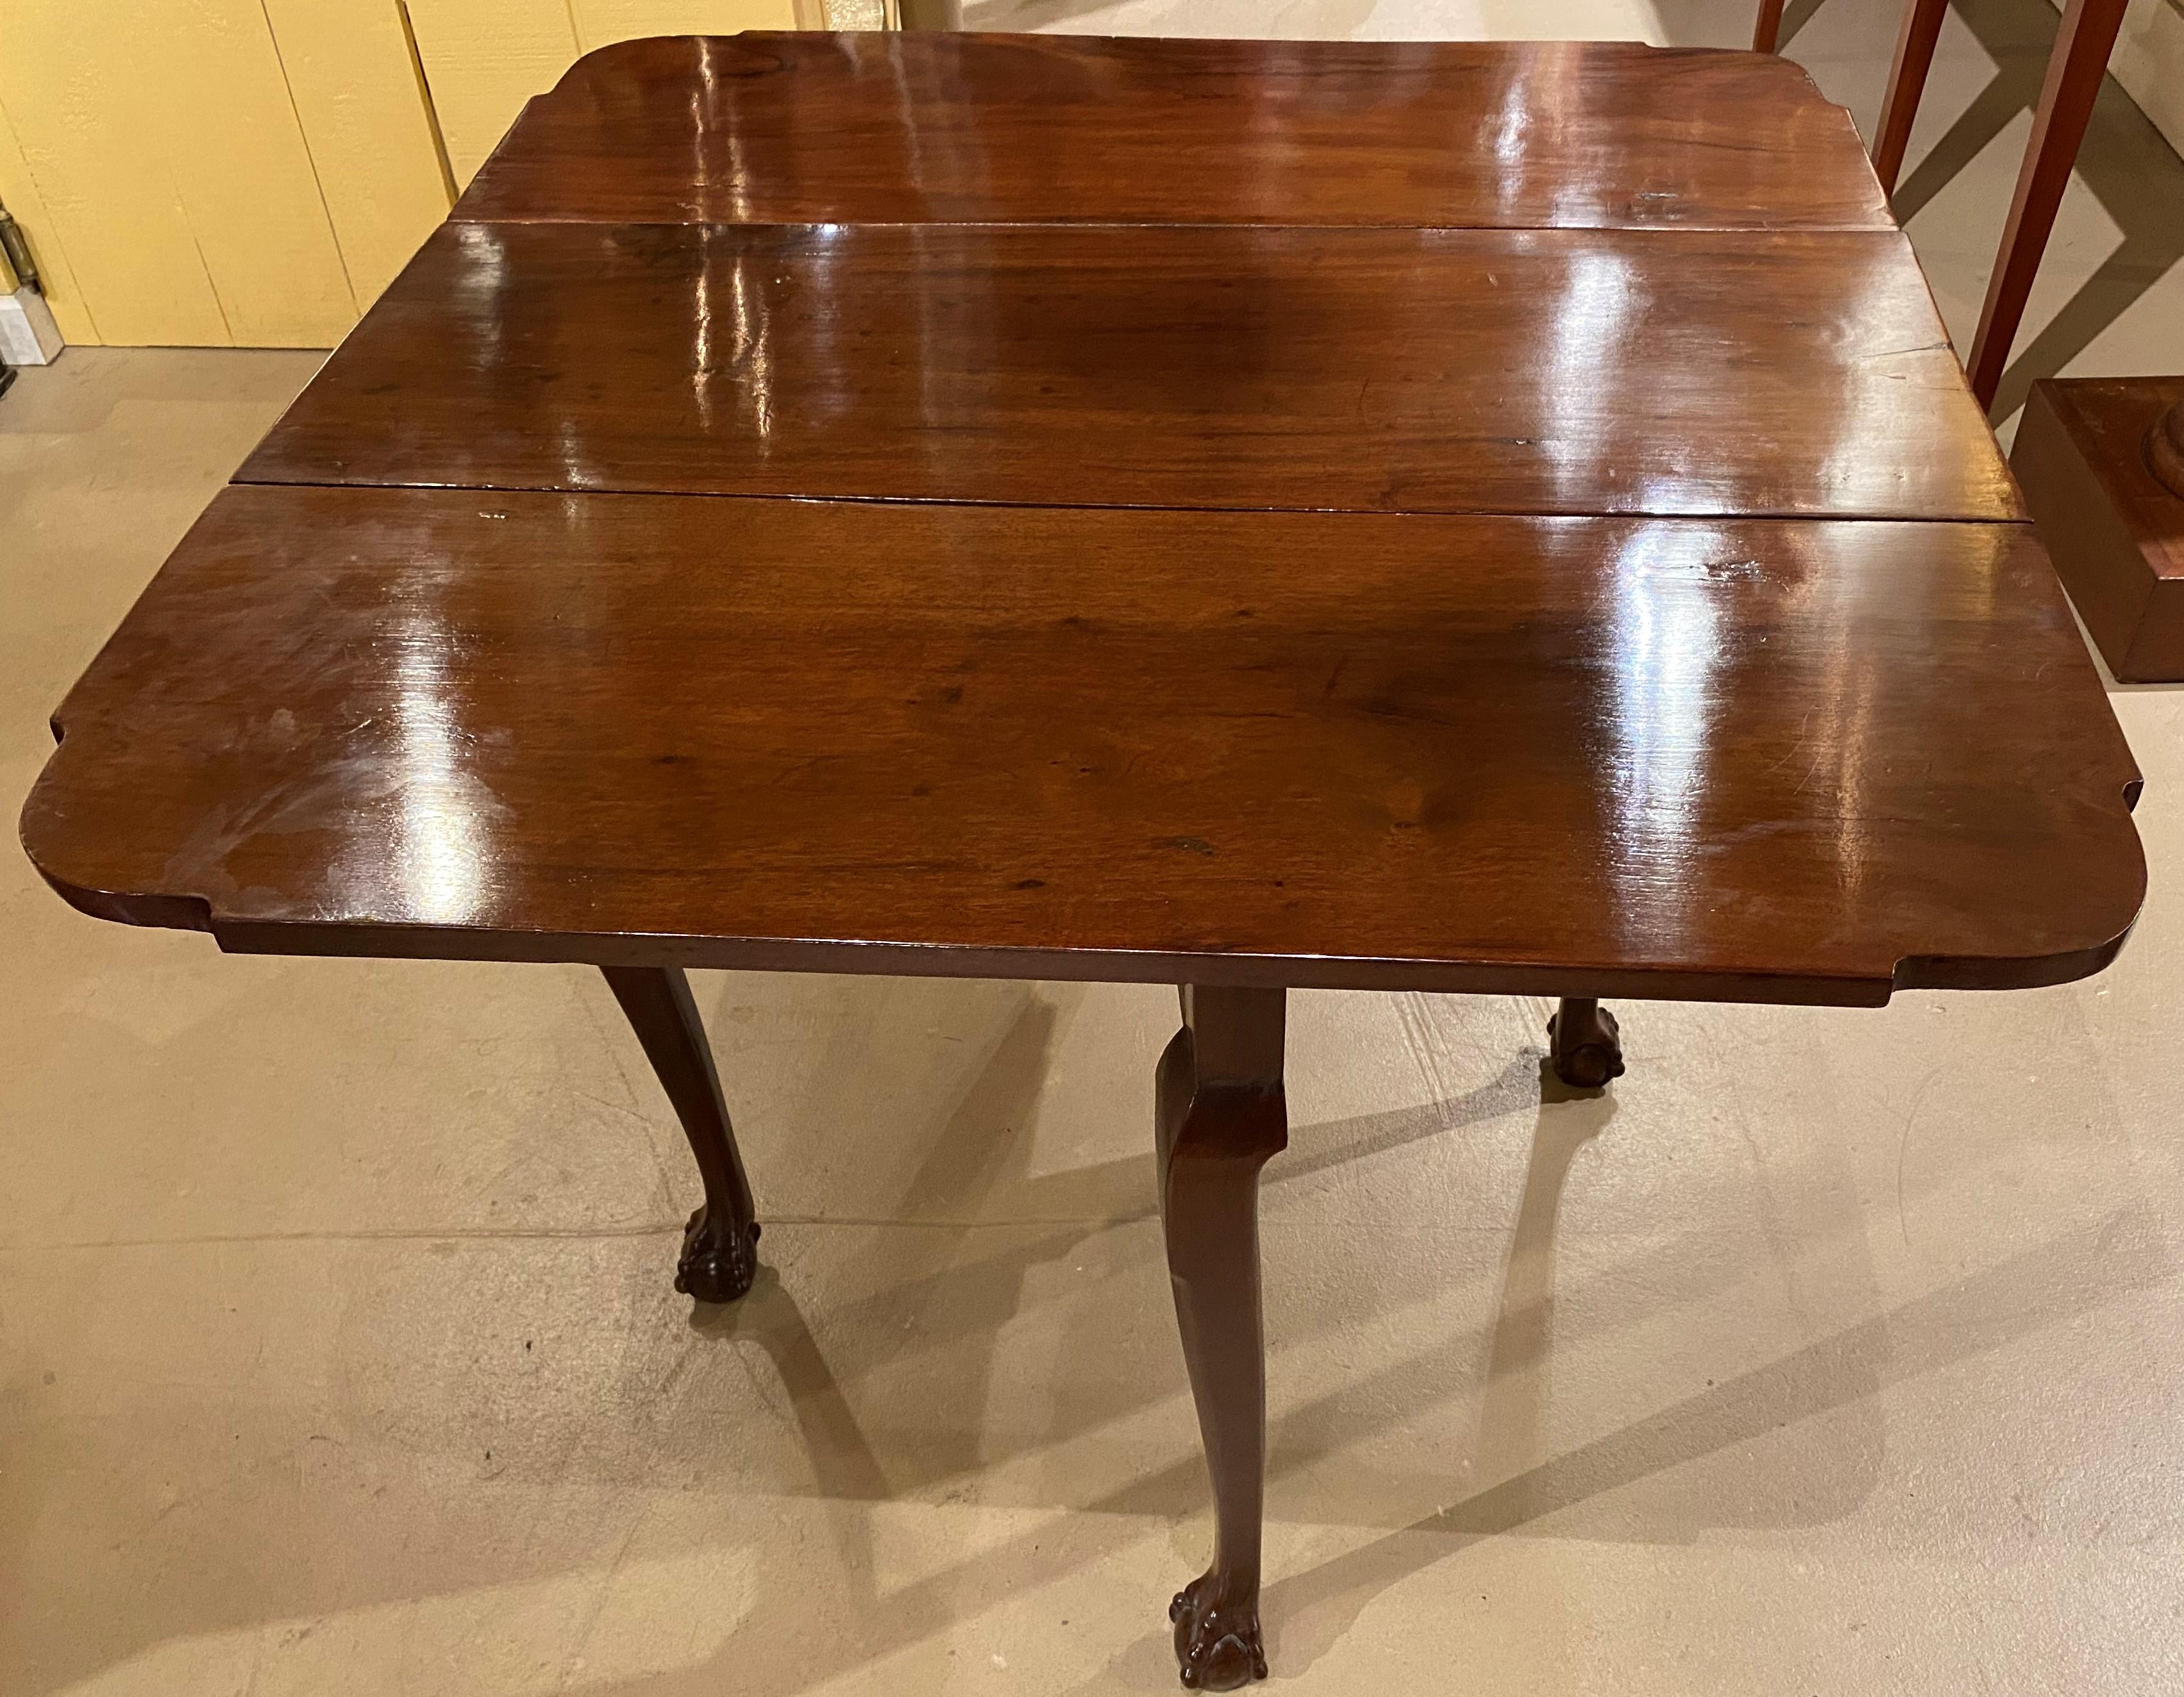 Chippendale 18th Century Massachusetts Mahogany Drop Leaf Table with Ball & Claw Feet For Sale